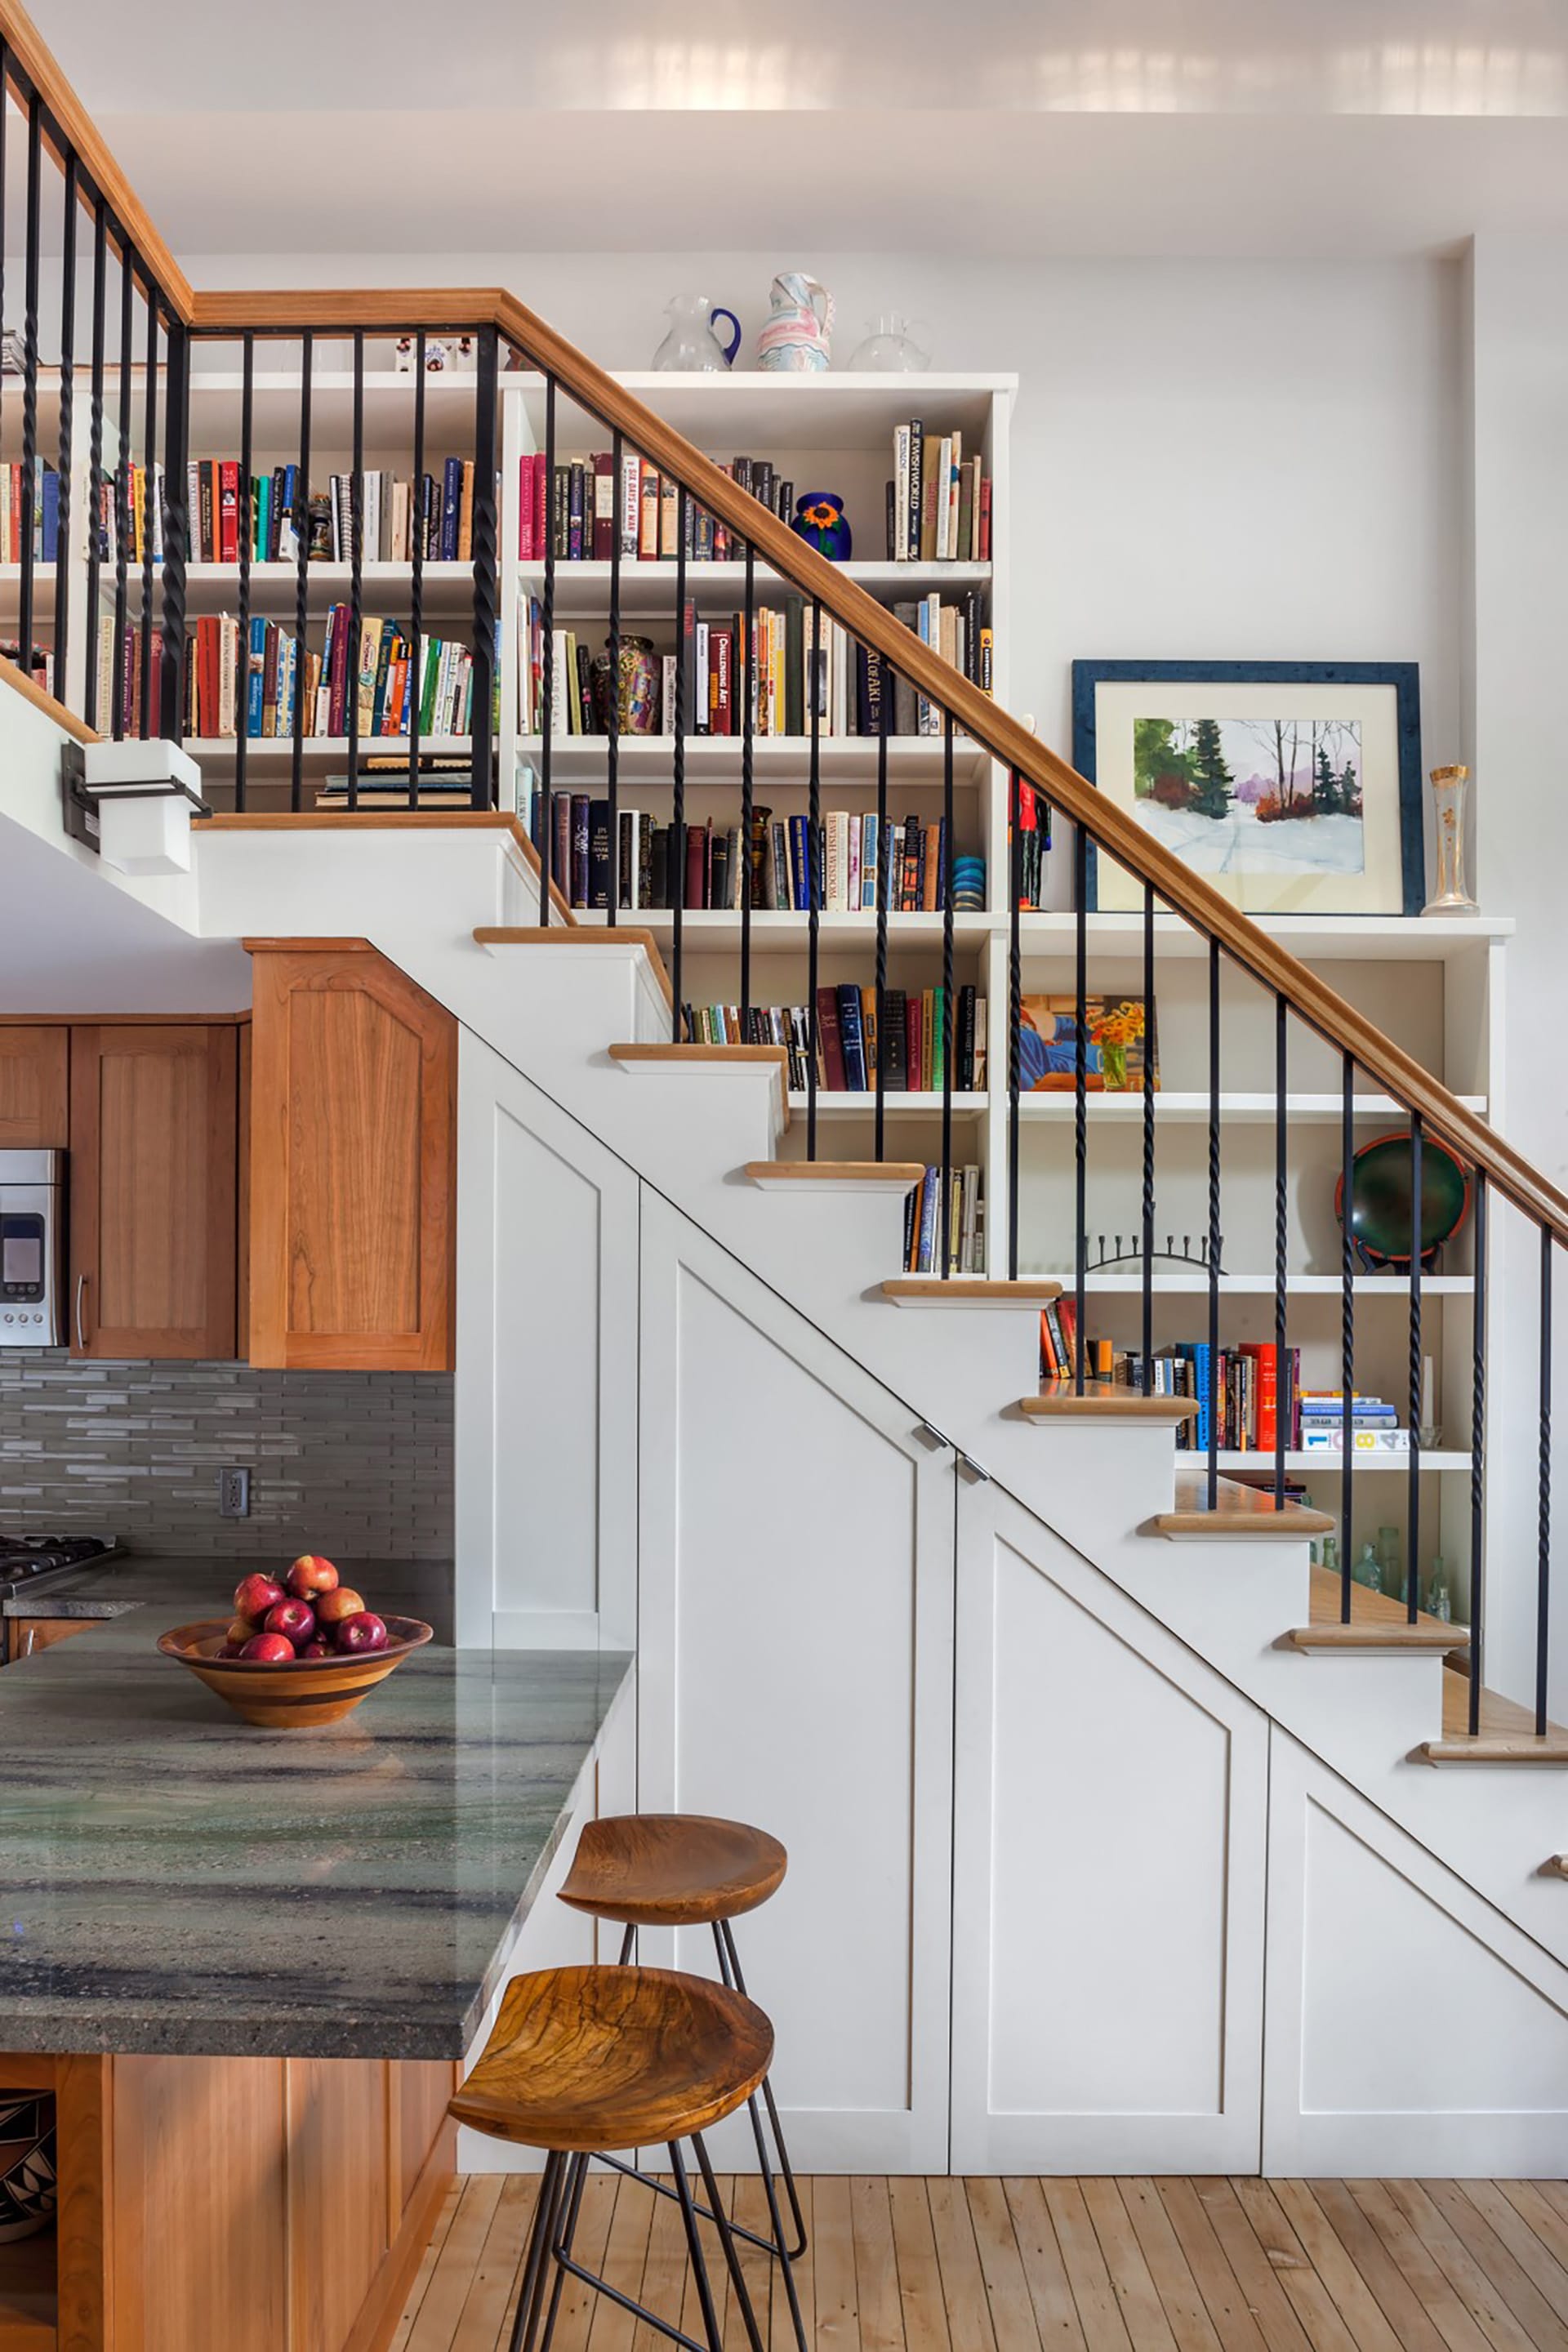 Staircase lined with built-in bookshelves and open metal railings.